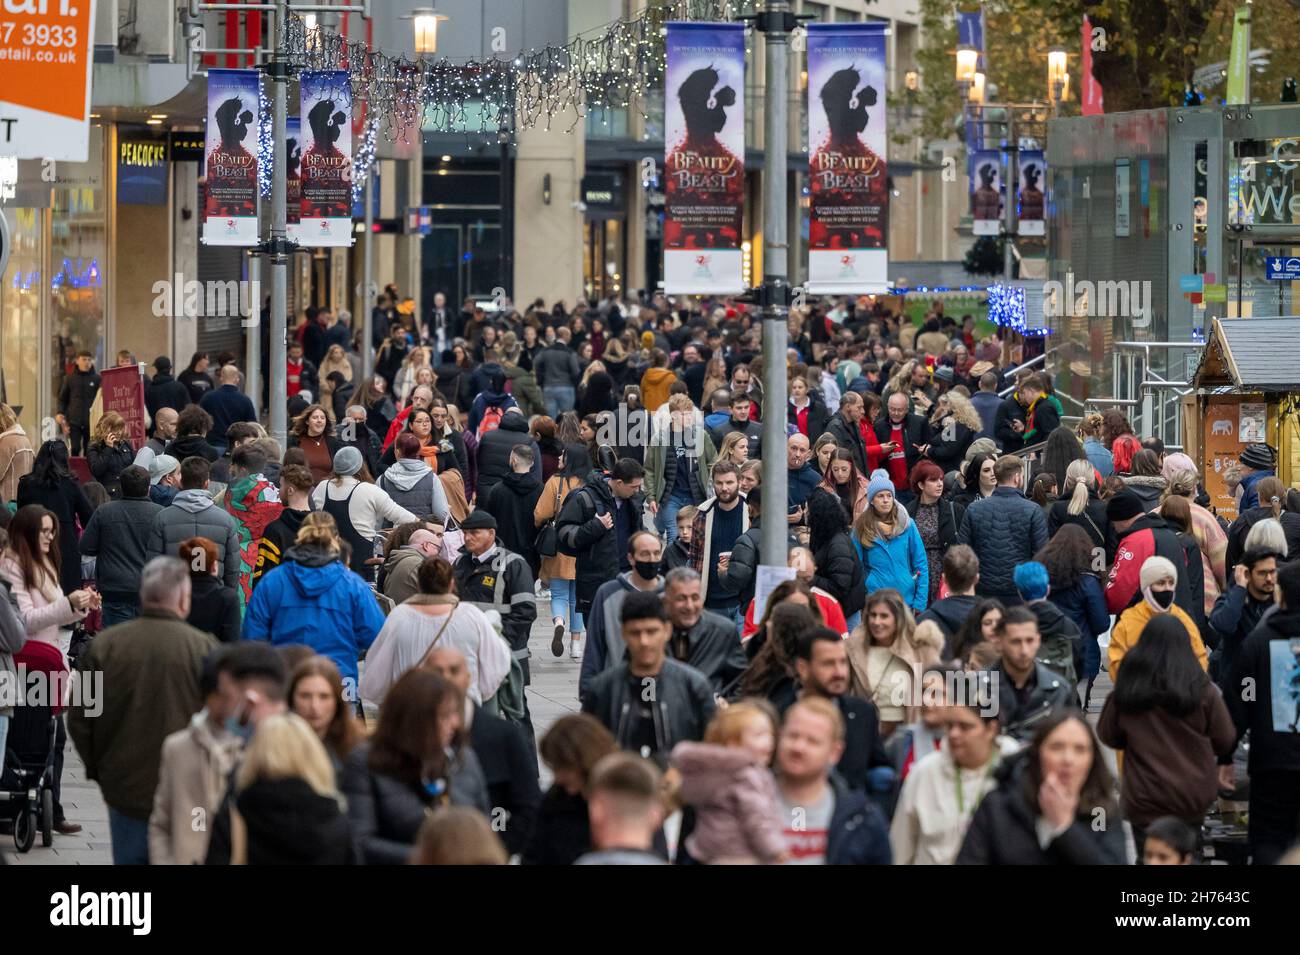 CARDIFF, WALES - NOVEMBER 20: A general view of a busy Cardiff city centre ahead of the Wales v Australia rugby game at the Principality Stadium on No Stock Photo